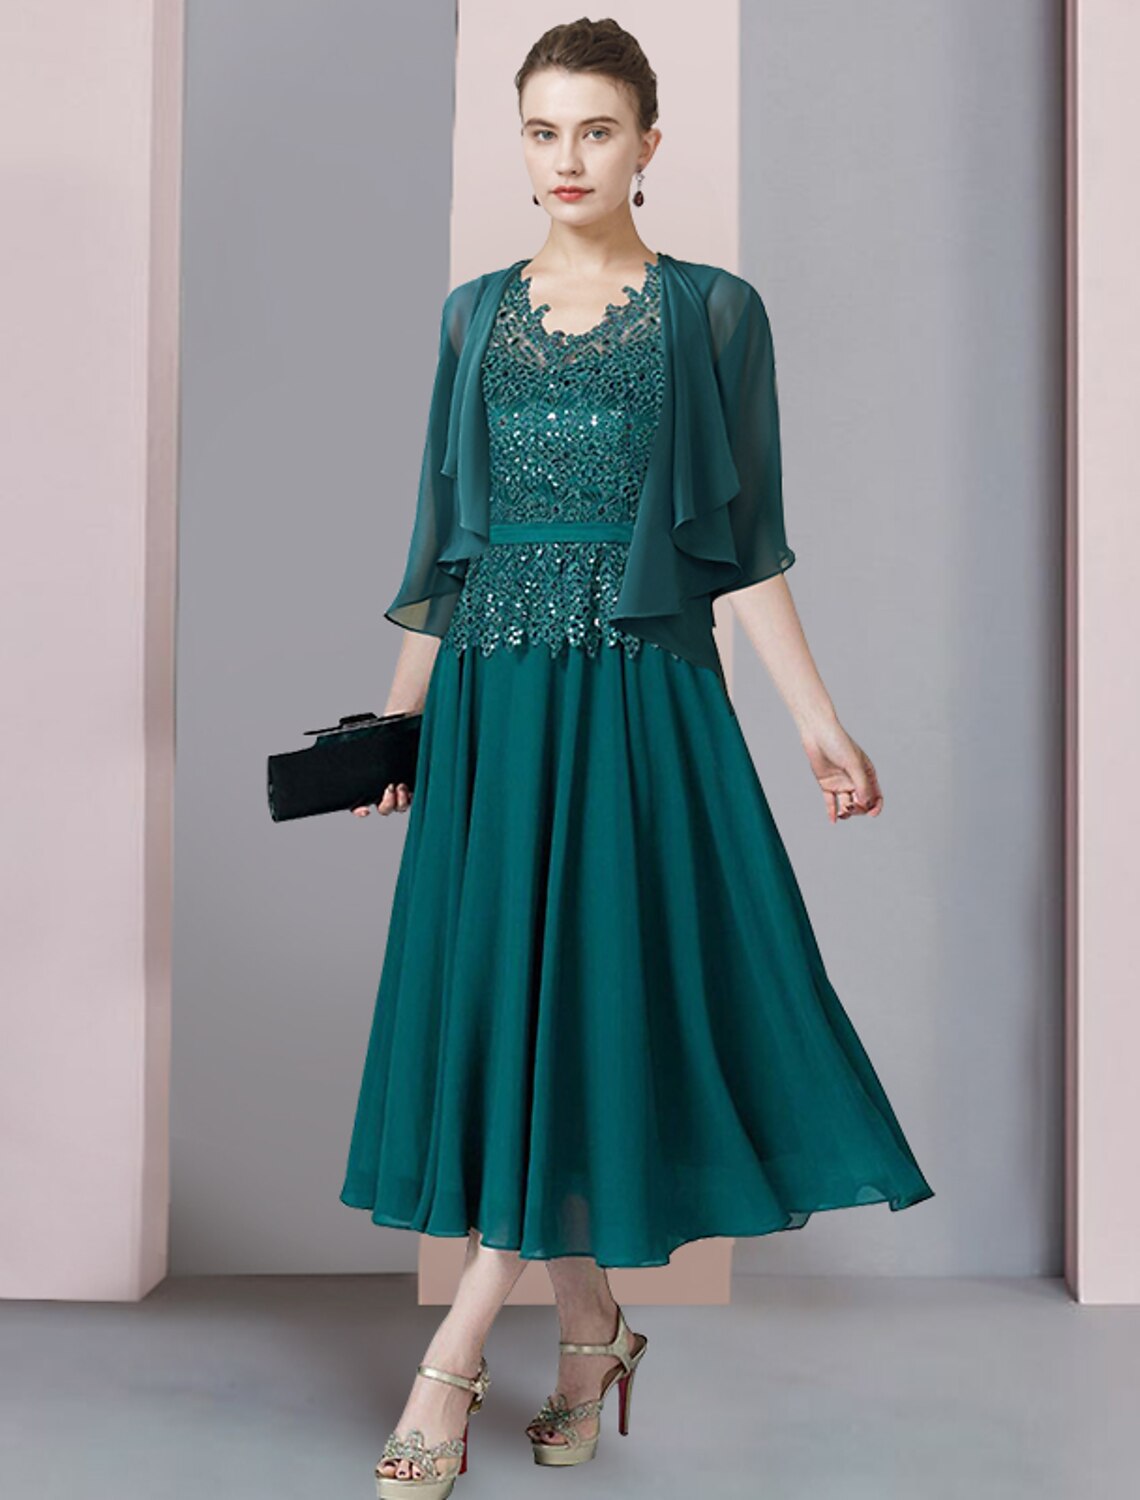 Two Piece A-Line Mother of the Bride Dress Formal Wedding Guest Elegant V Neck Tea Length Chiffon Lace Short Sleeve Wrap Included with Sequin Appliques